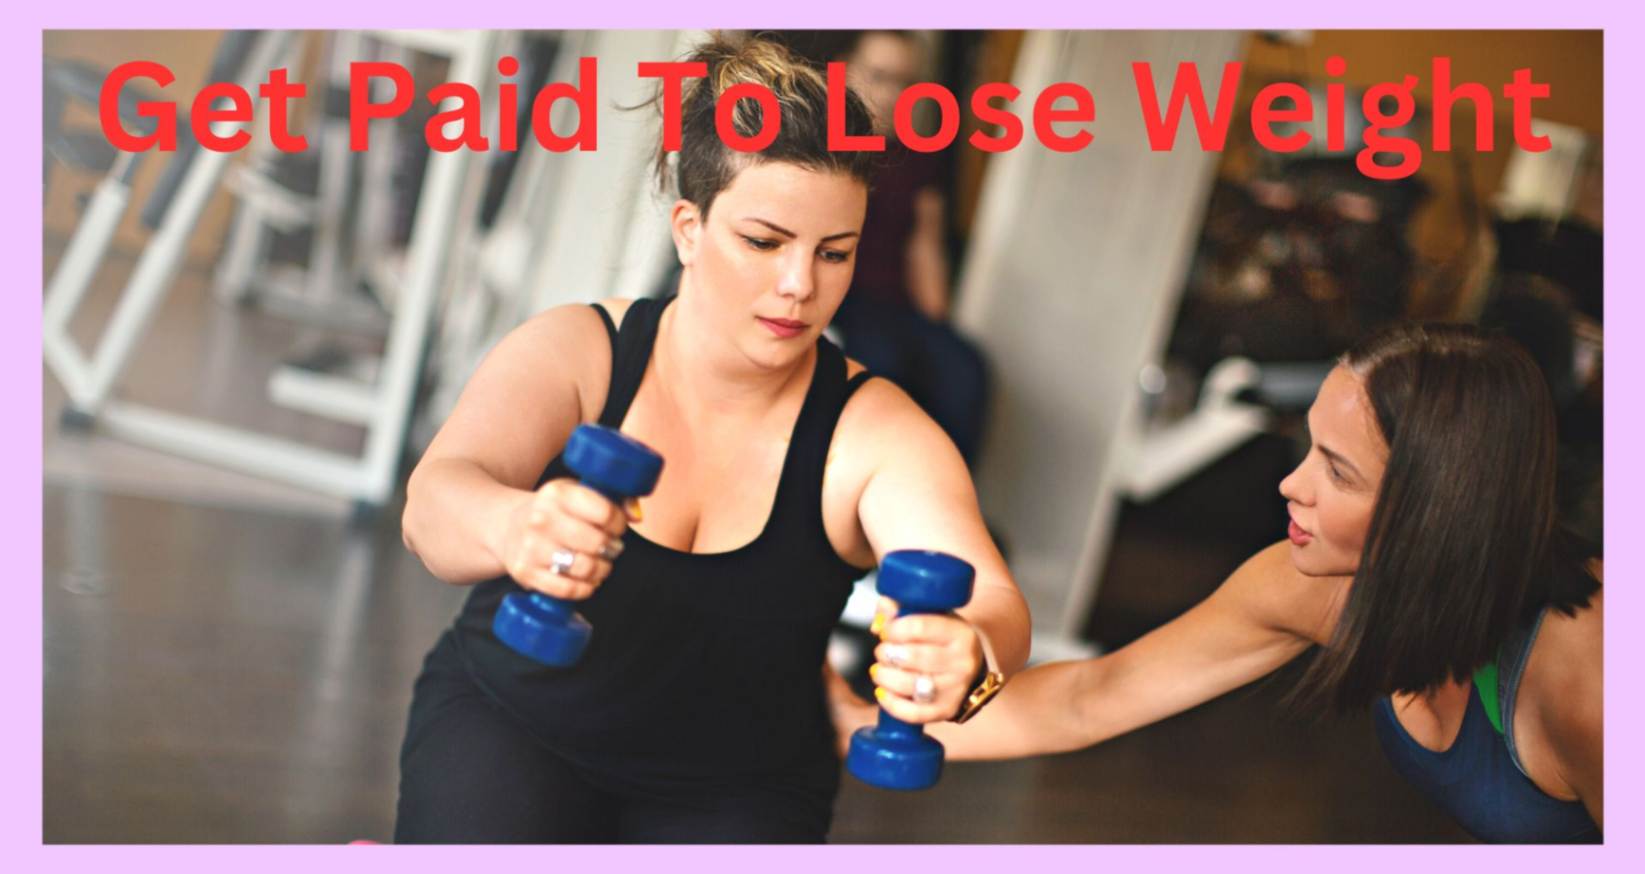 Get Paid to Lose Weight to earn free money in your own schedule